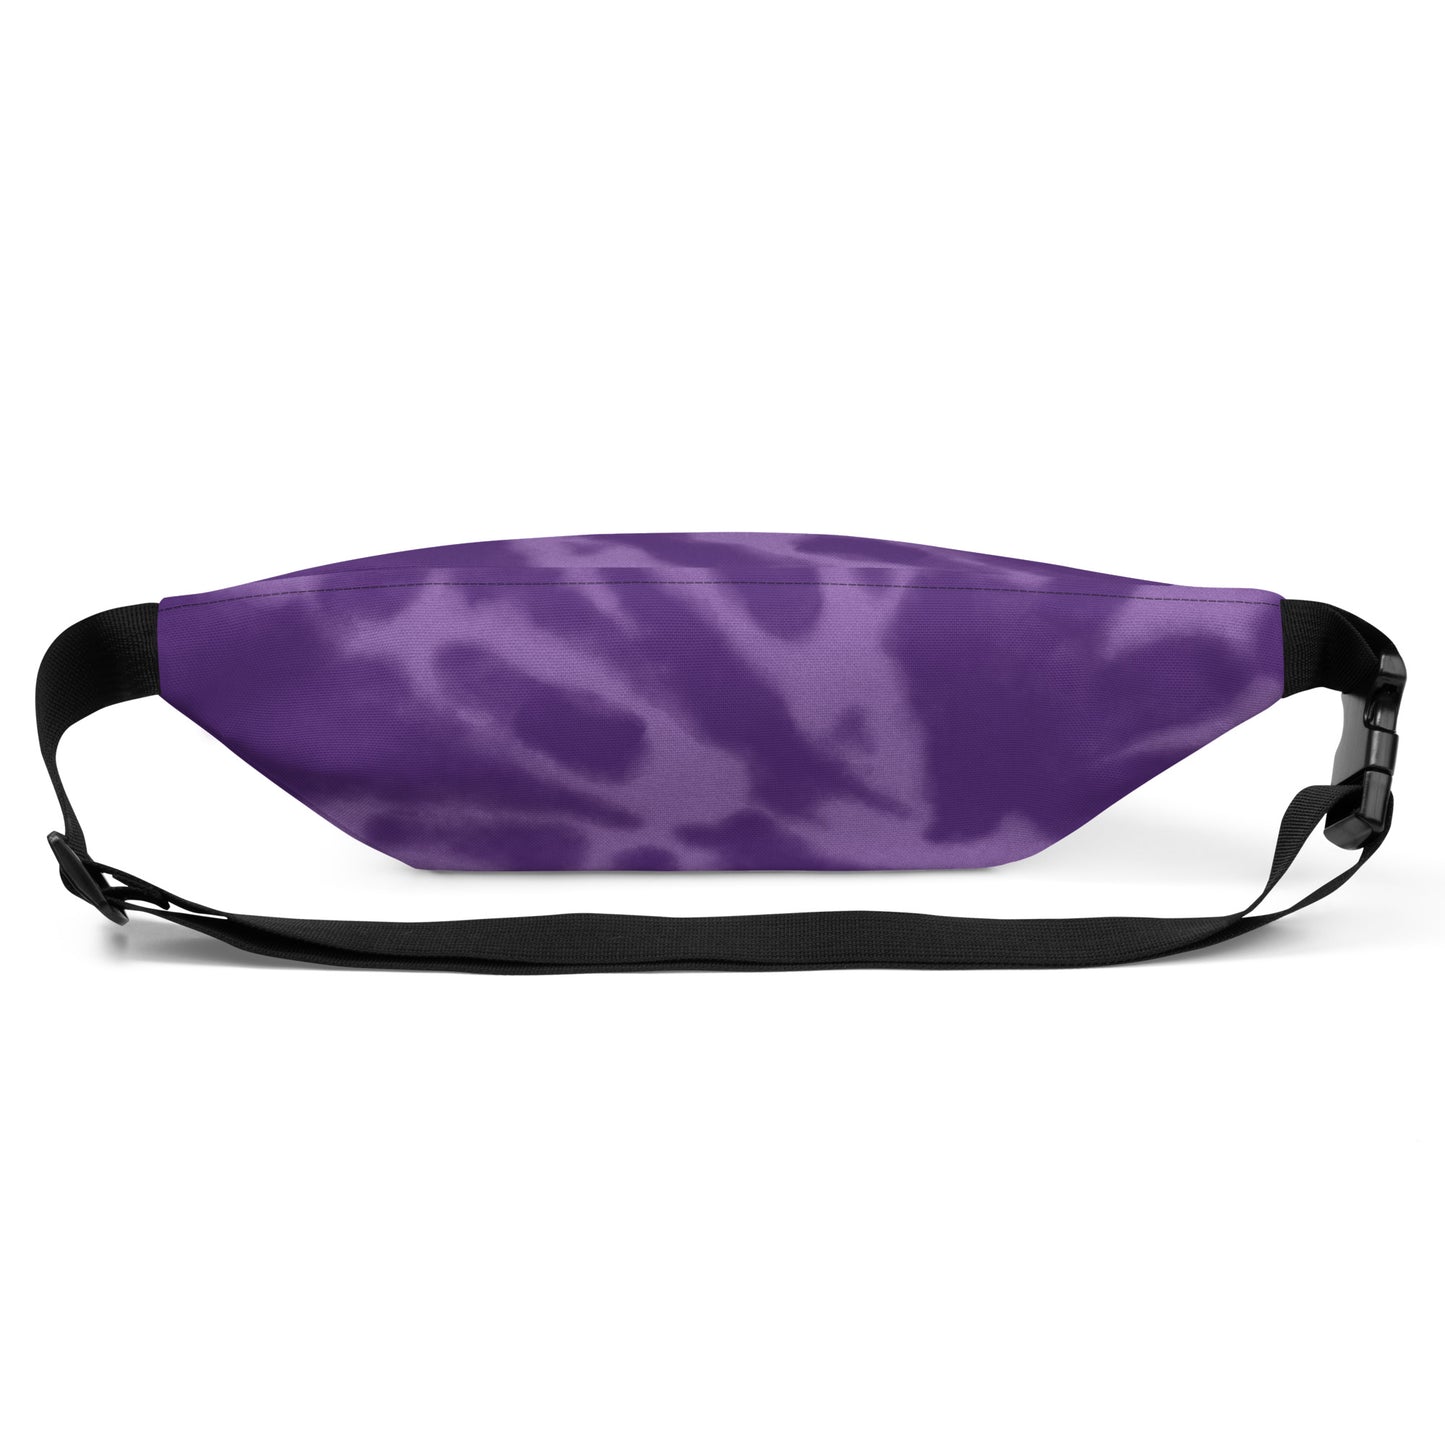 Travel Gift Fanny Pack - Purple Tie-Dye • EZE Buenos Aires • YHM Designs - Image 09